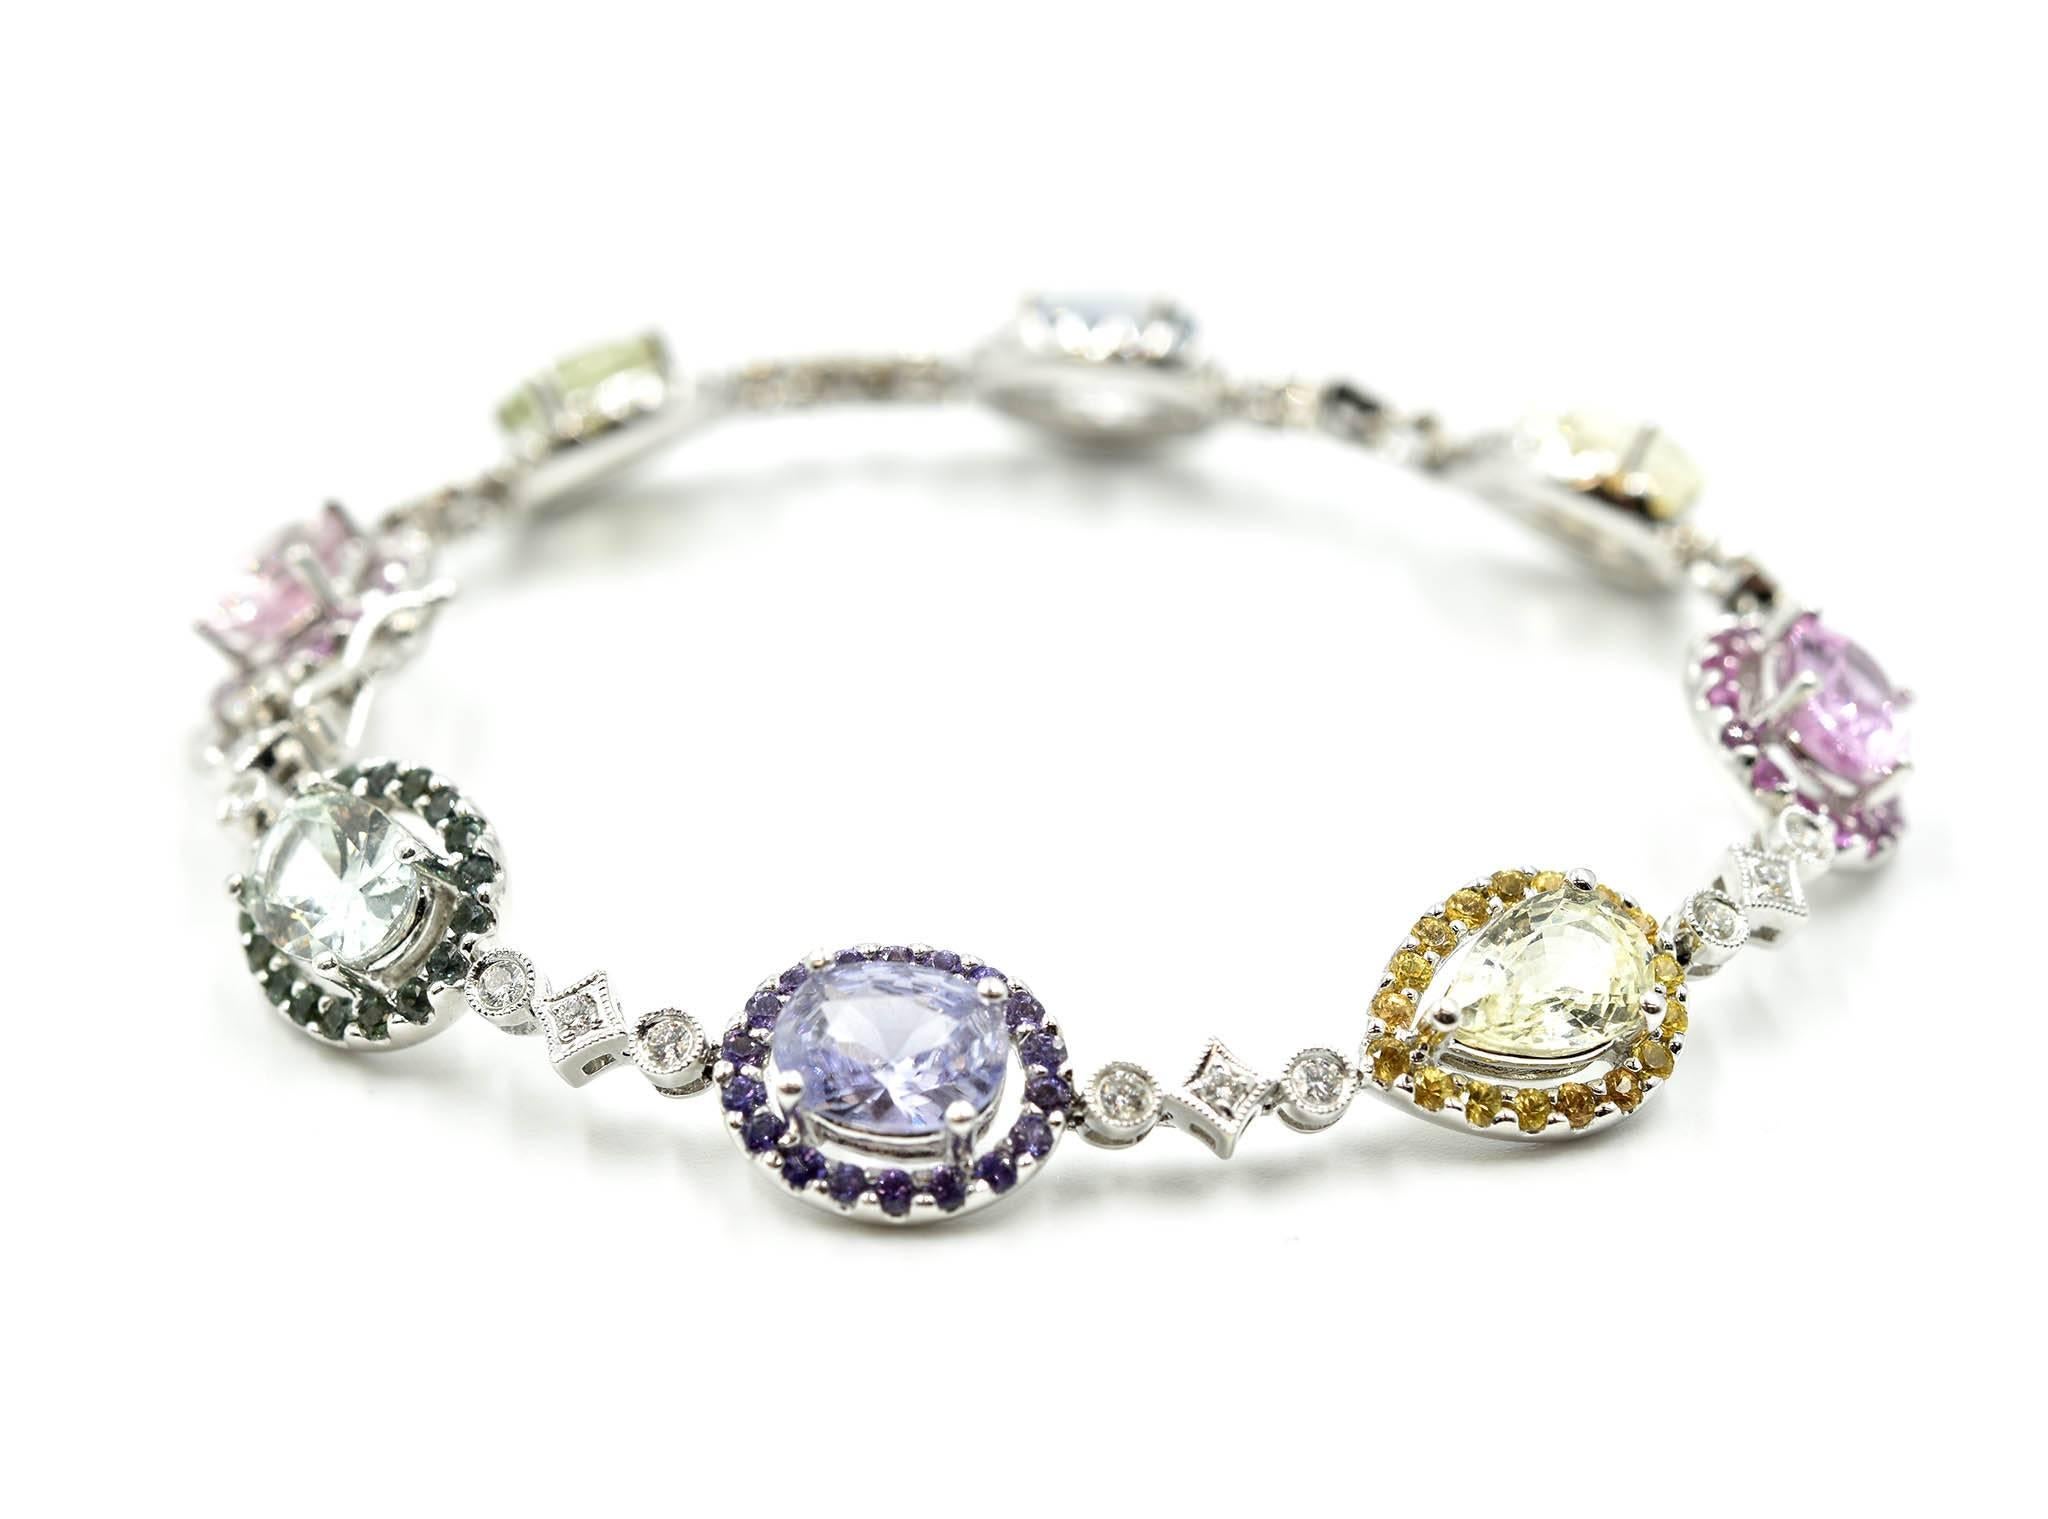 Designer: custom design
Material: 18k white gold
Diamonds: round brilliant cuts 0.47 carat total weight
Sapphires: round and pear cut sapphires ranging from yellow to pink to blue and green = 15.07 carat total weight
Dimensions: bracelet is 6 ¾